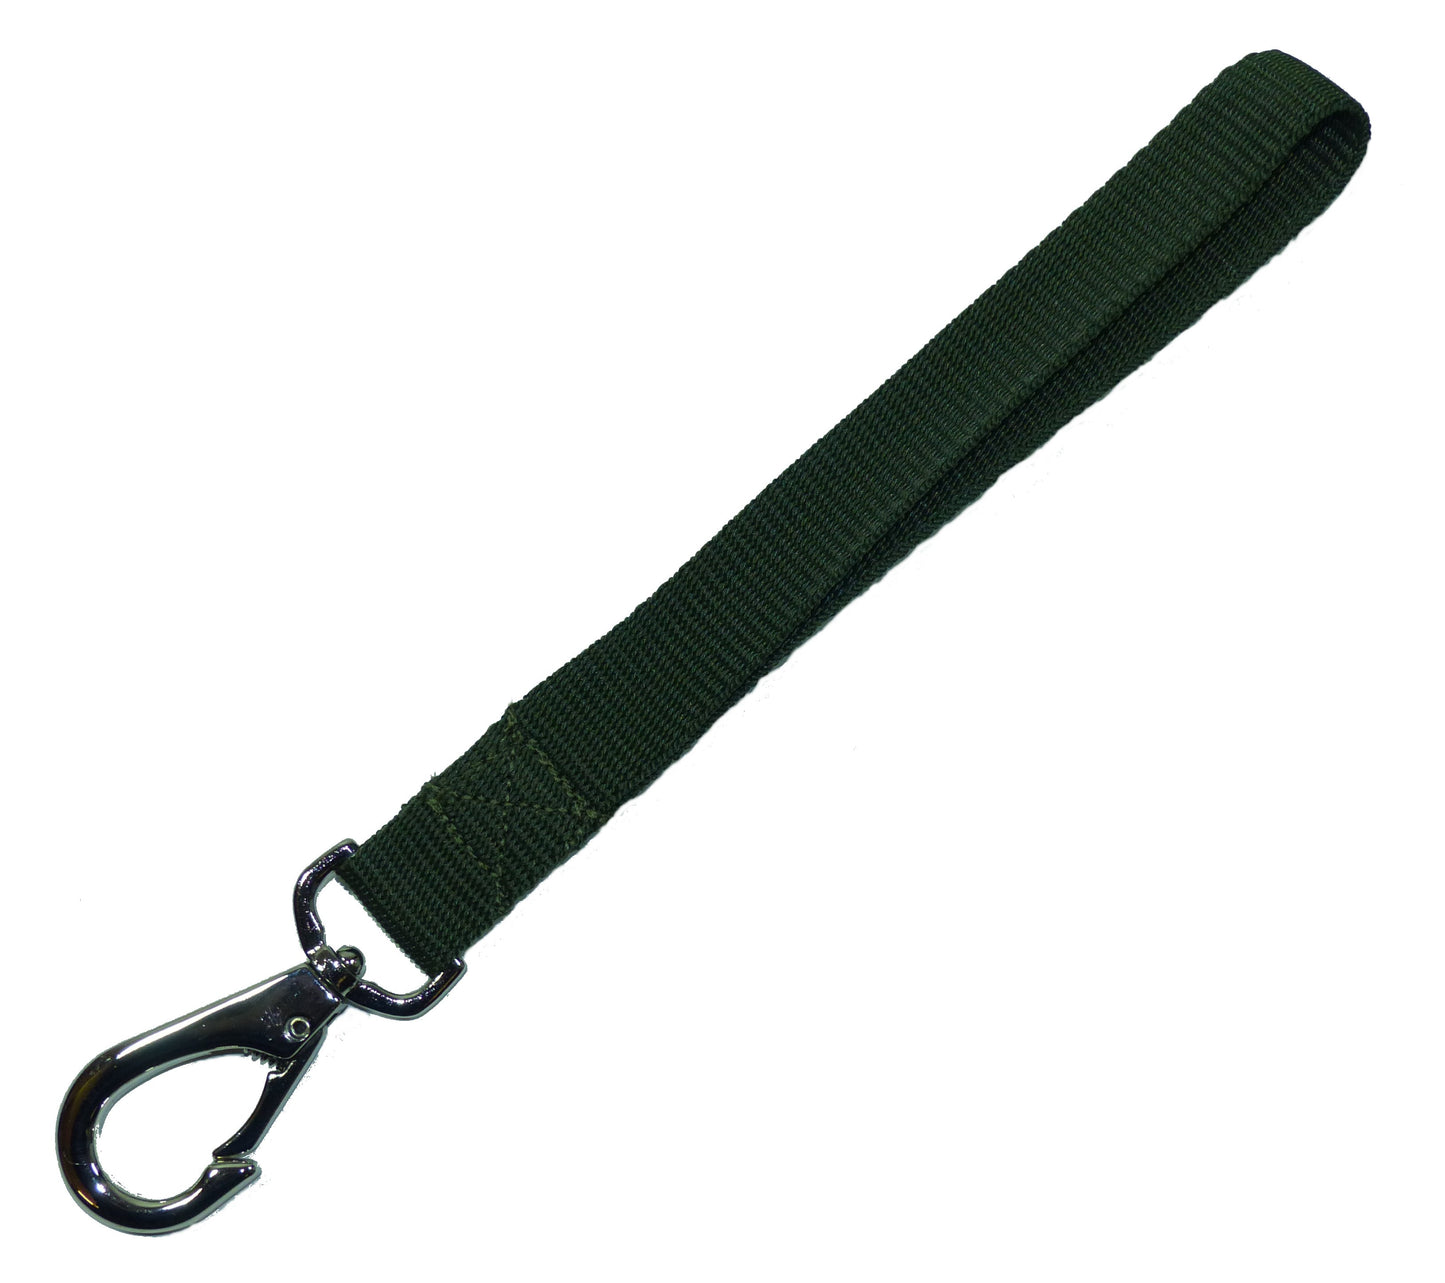 25mm Buggy Handle Carry Strap in olive